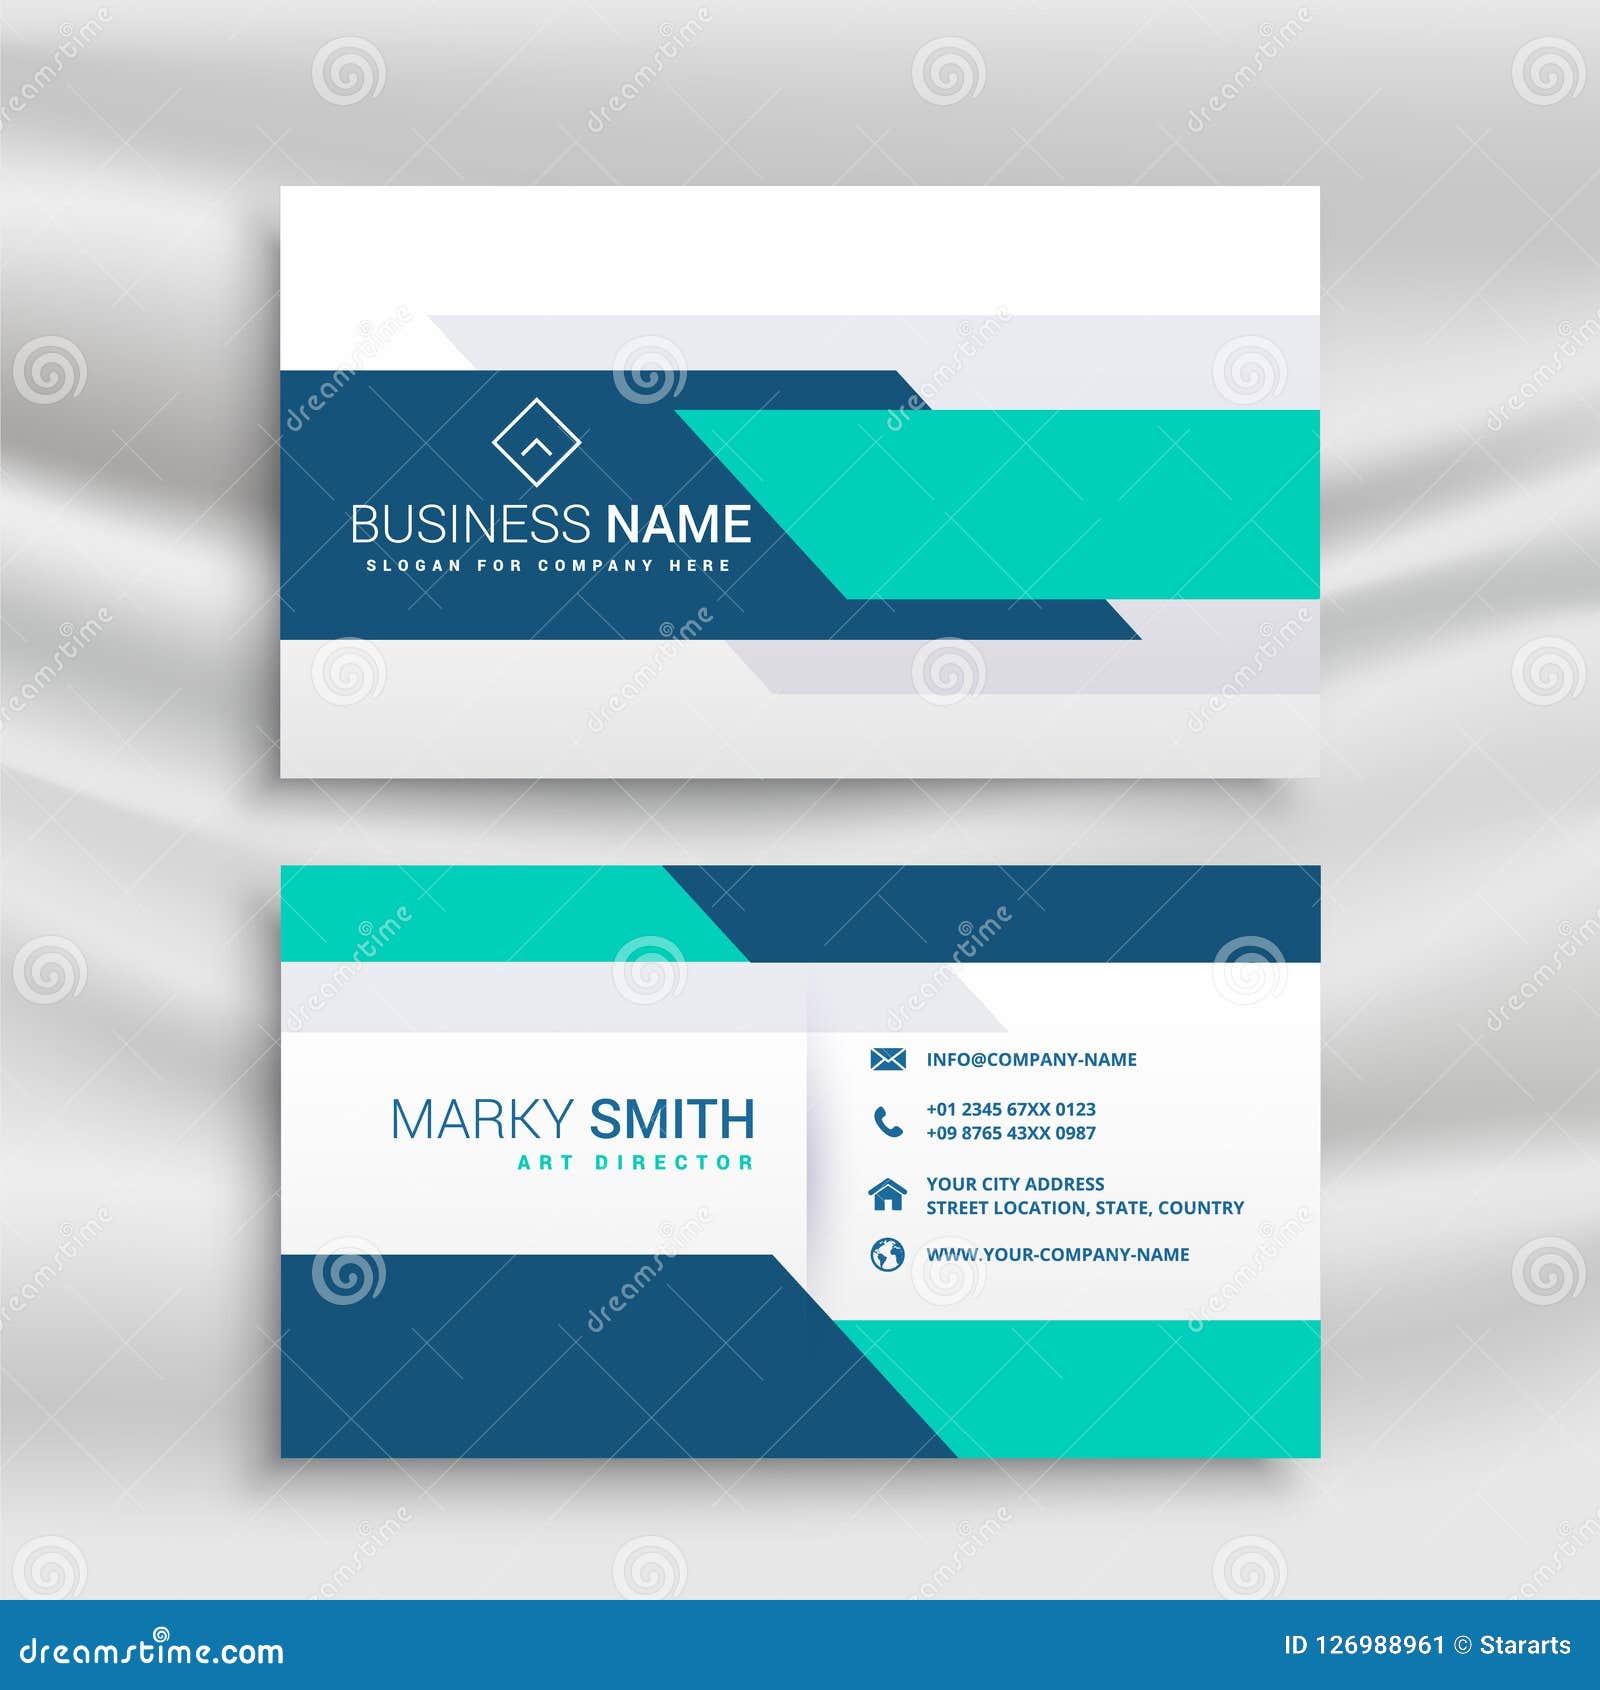 Medical Doctor Business Card Template - PPT Template Free 21 Regarding Medical Business Cards Templates Free